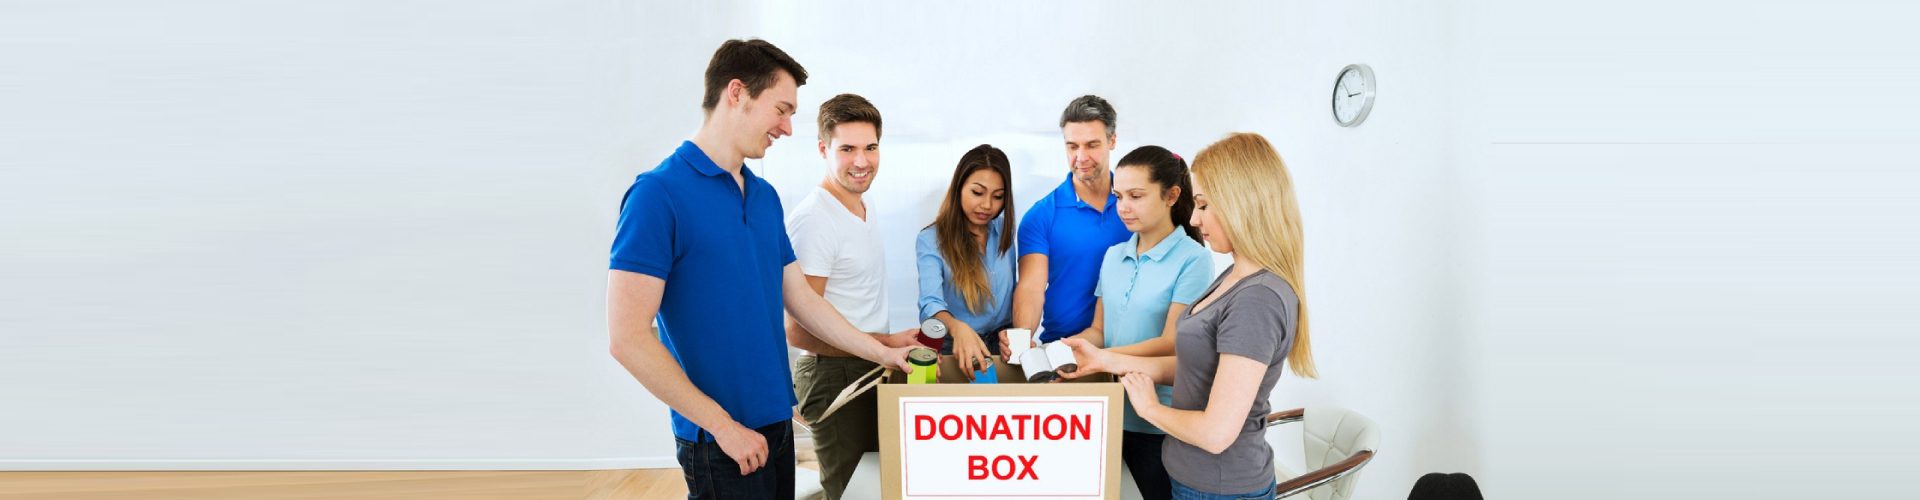 group of people donating